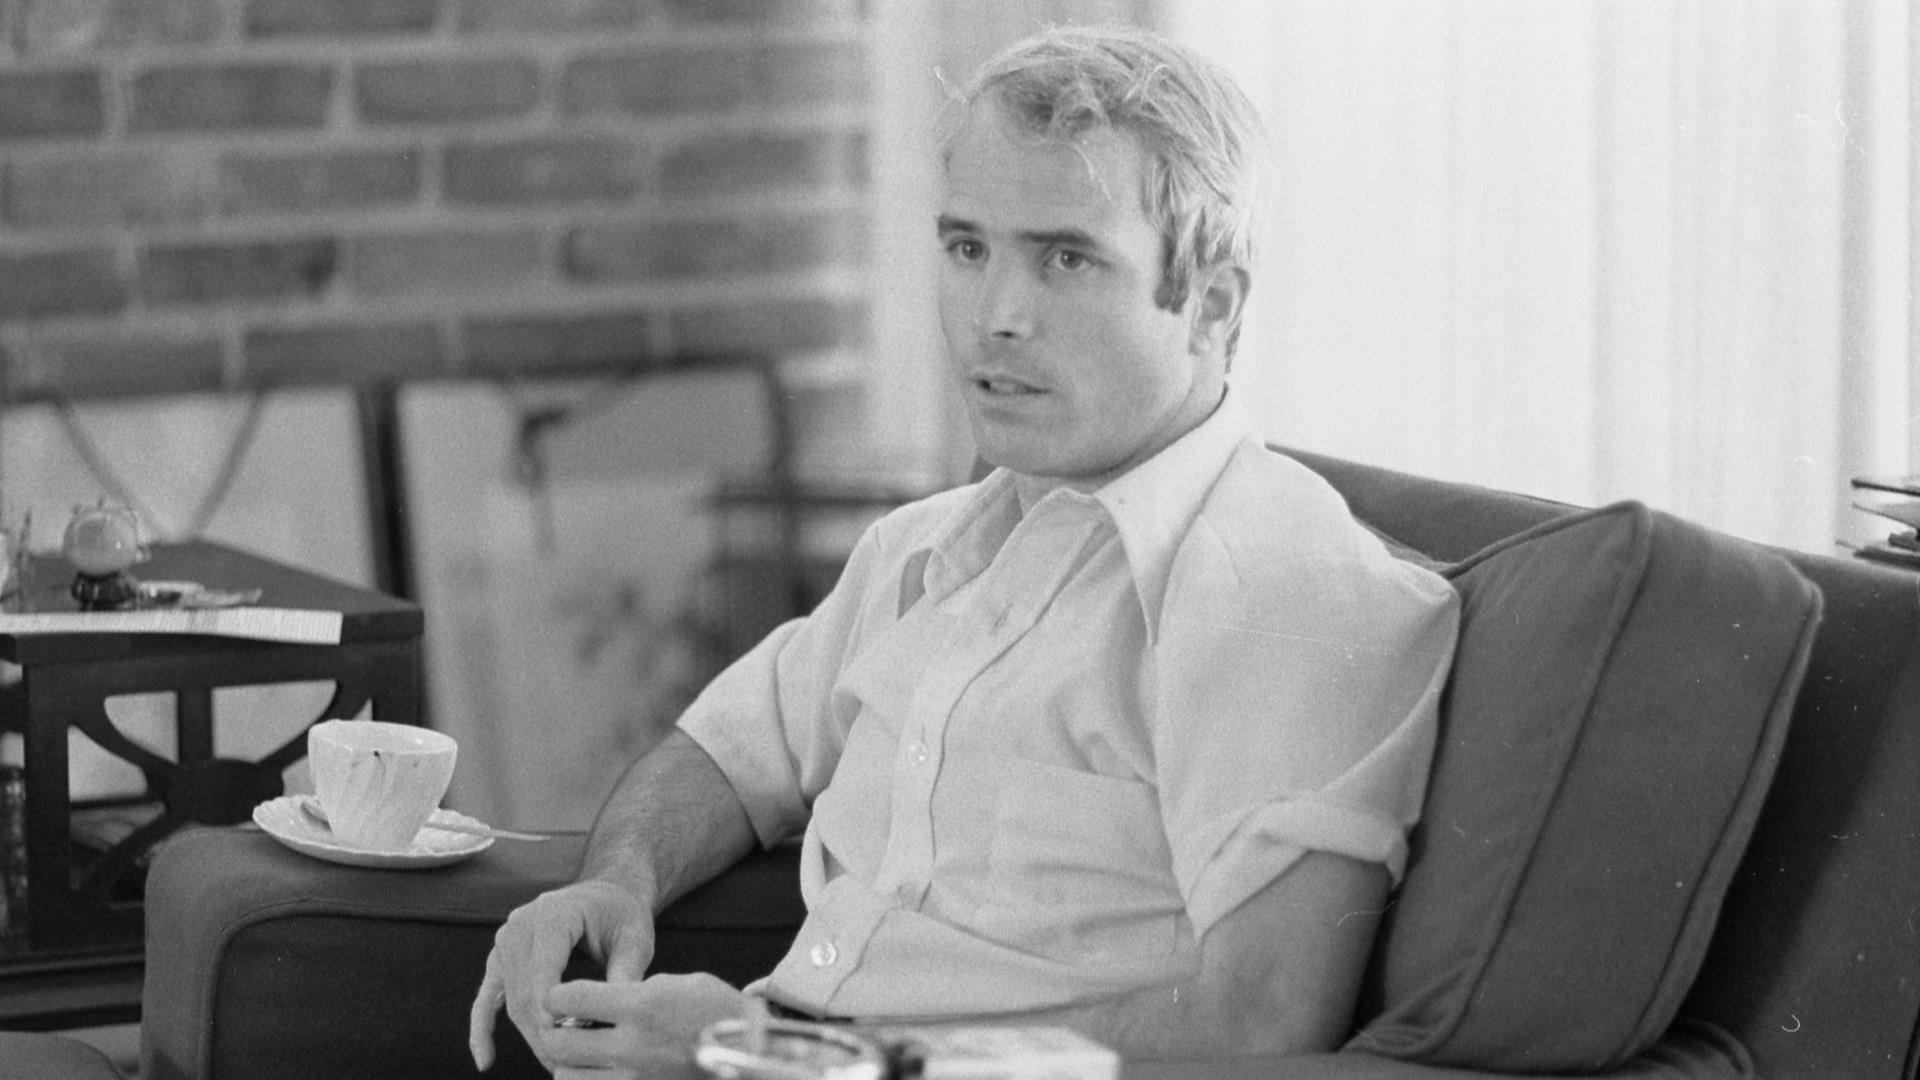 John McCain is shown in a blakc and white photographer in 1973, being interviewed about his experiences as a prisoner of war during the war in Vietnam.